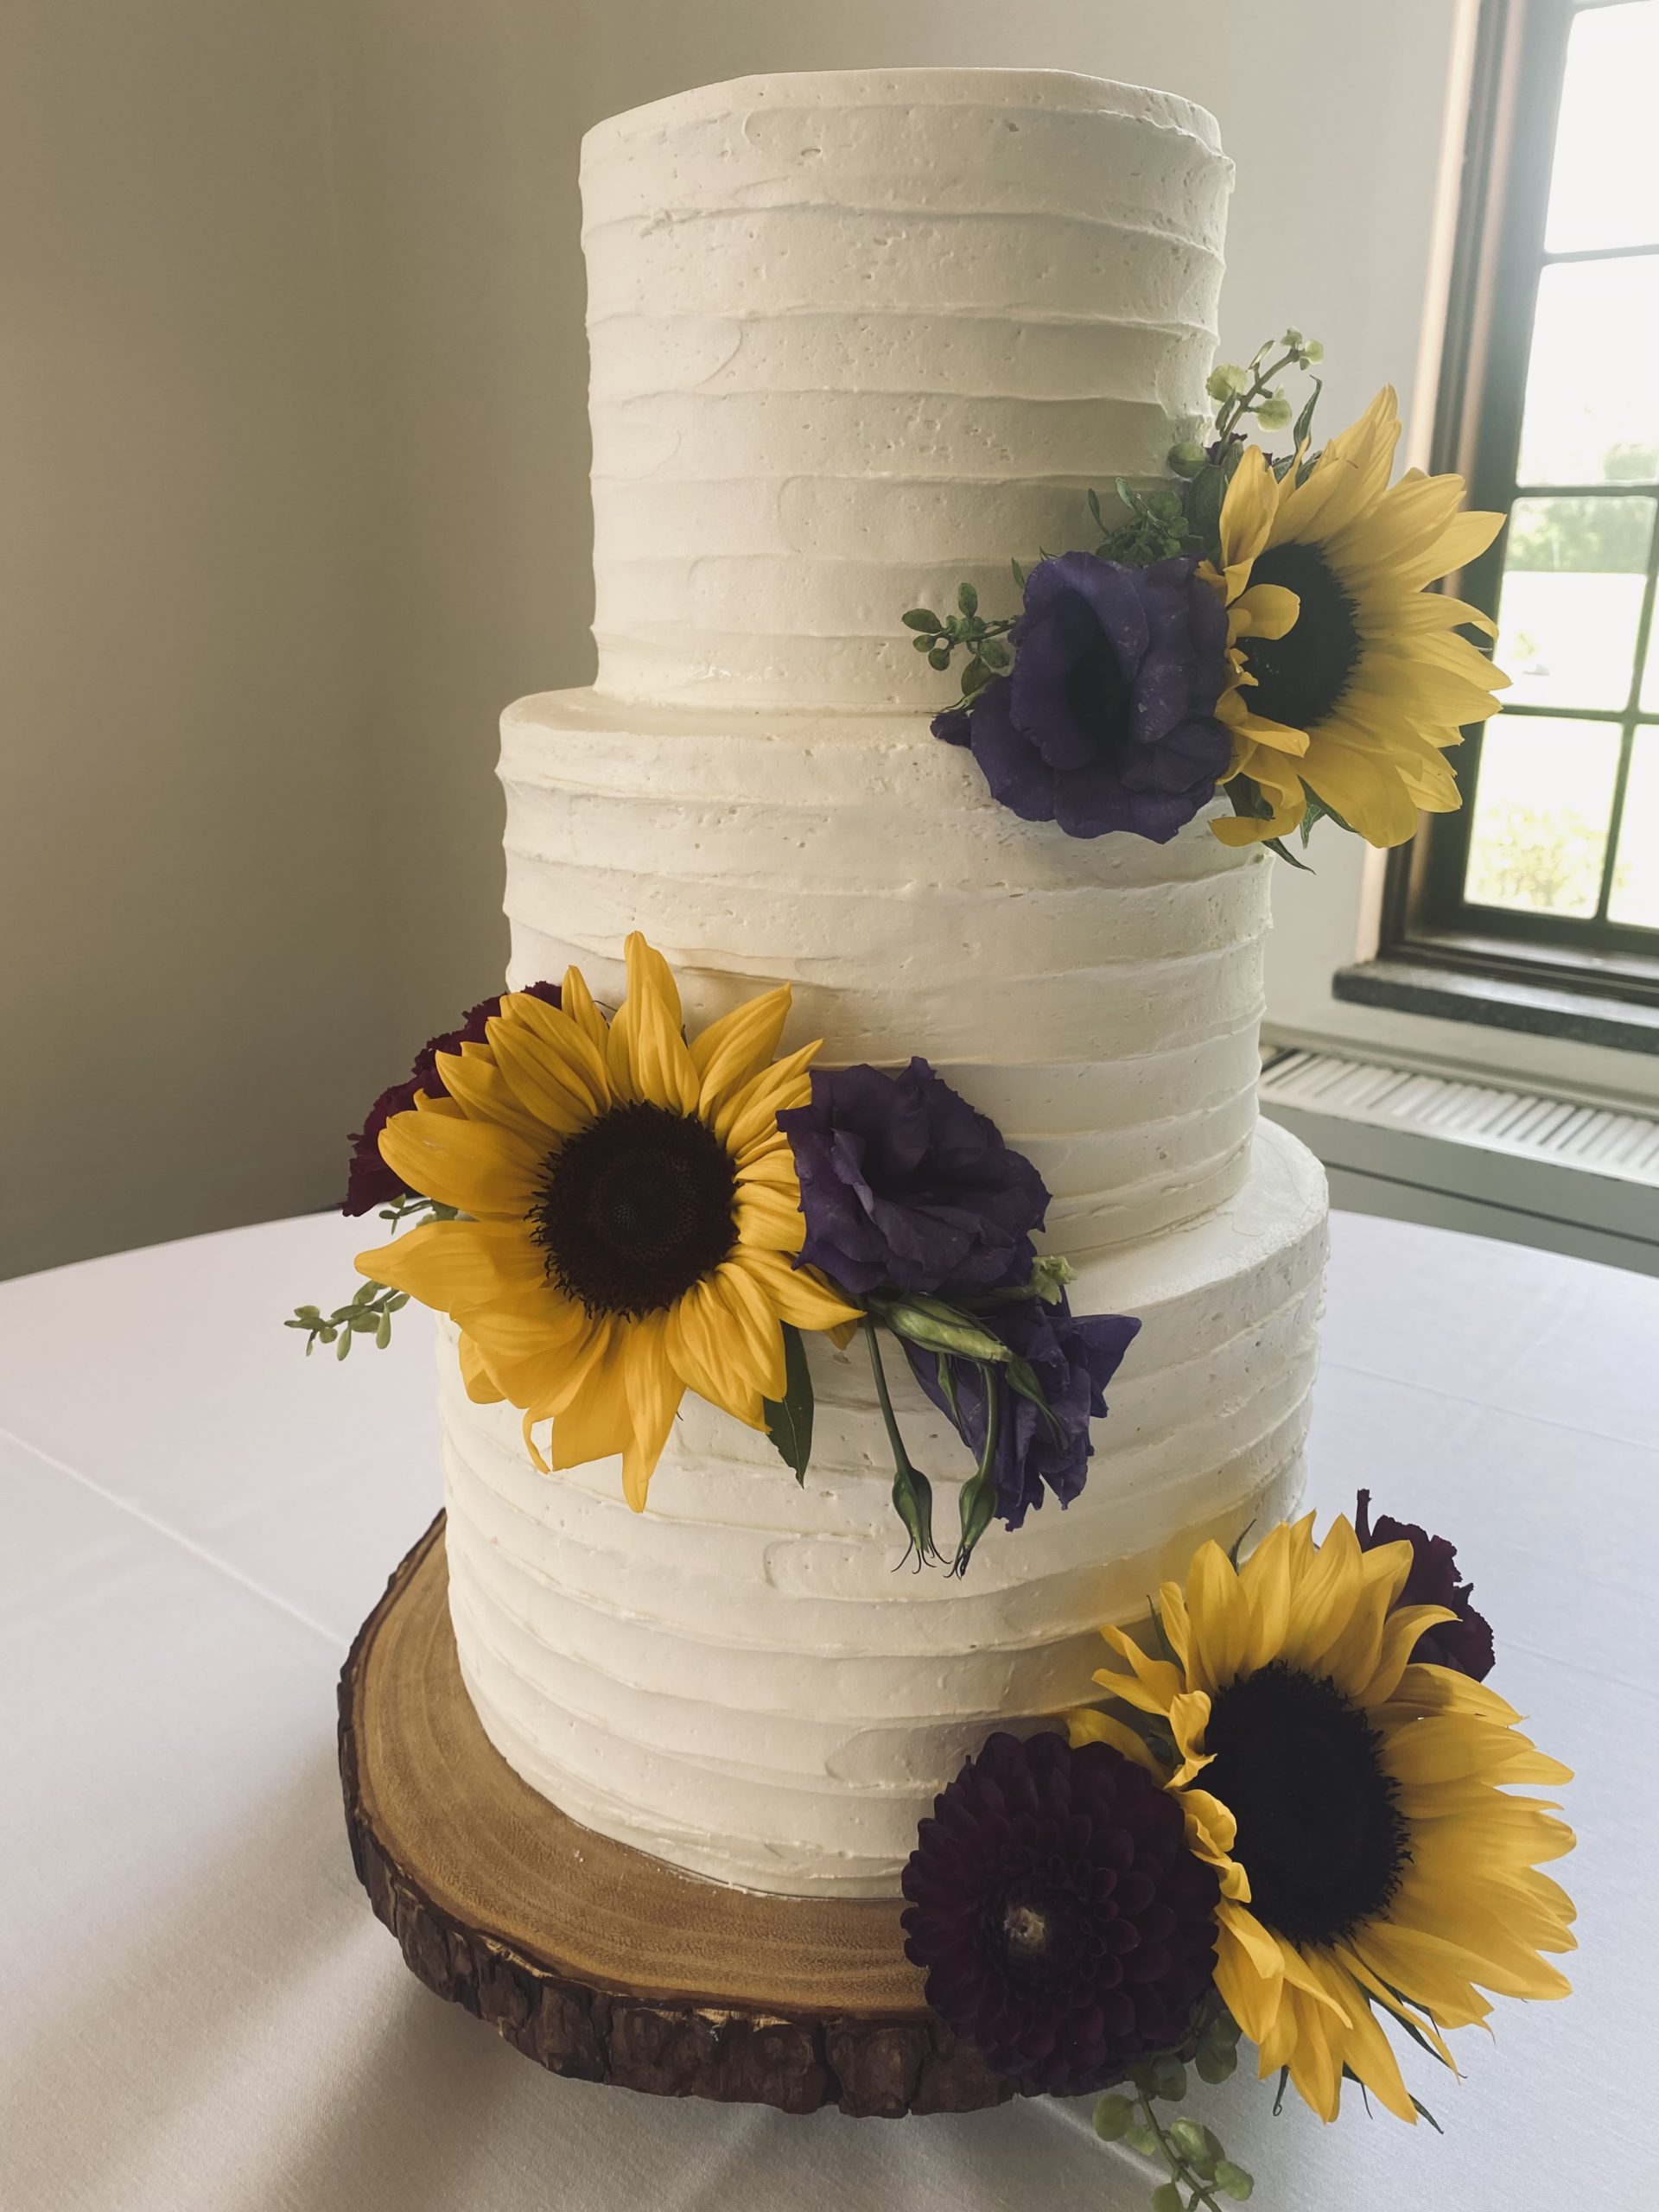 A beautiful 3-tier custom wedding cake with horizontal texture and live flowers from Village Patisserie in Toledo, Ohio